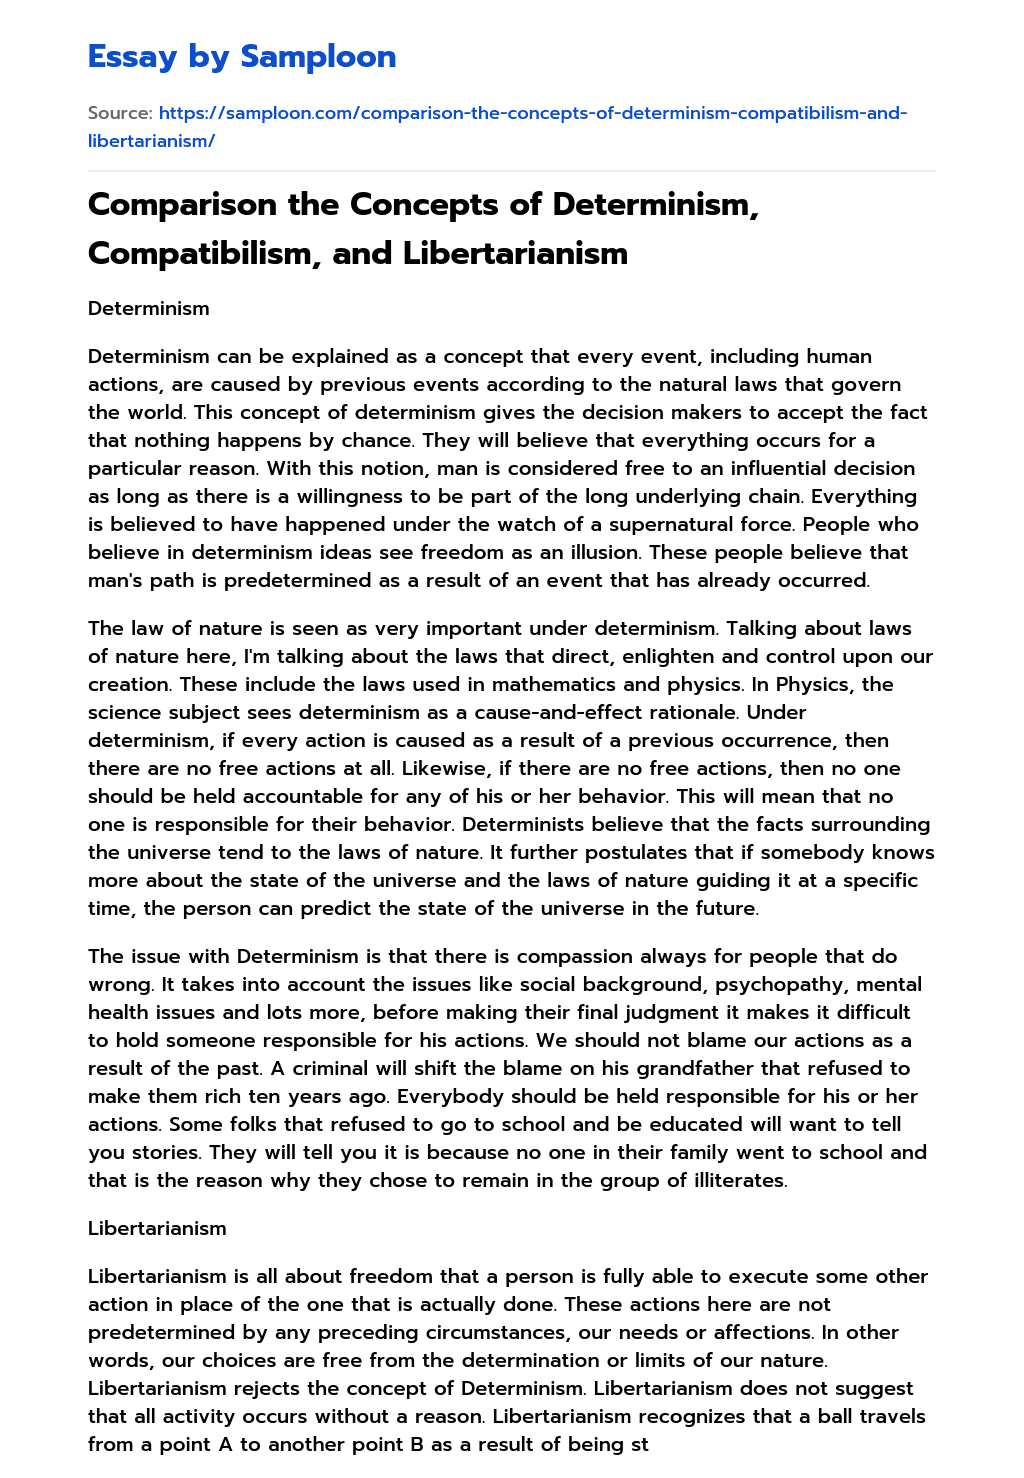 Comparison the Concepts of Determinism, Compatibilism, and Libertarianism essay